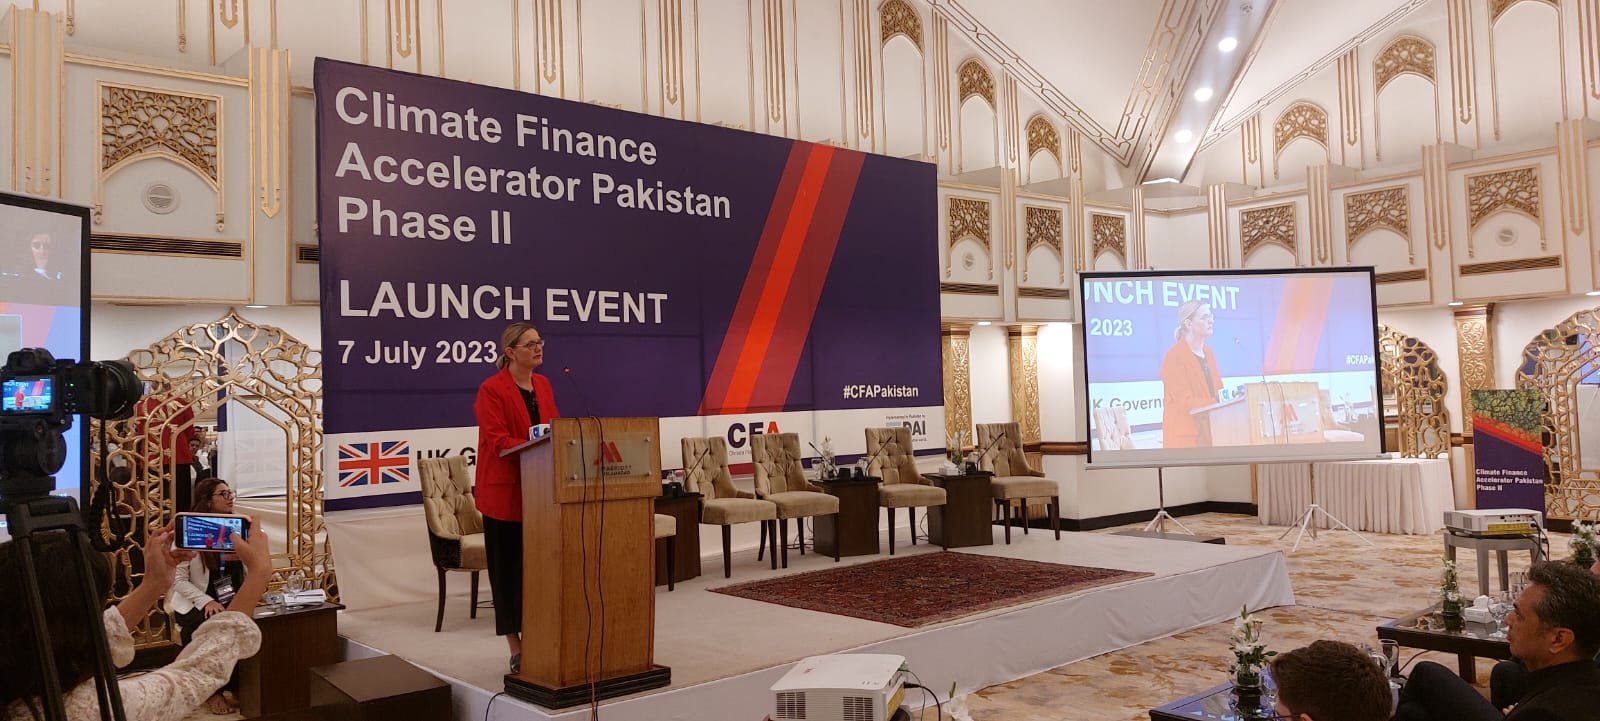 Pakistan's Climate Finance Accelerator 2 Calls For Low-Carbon Investment